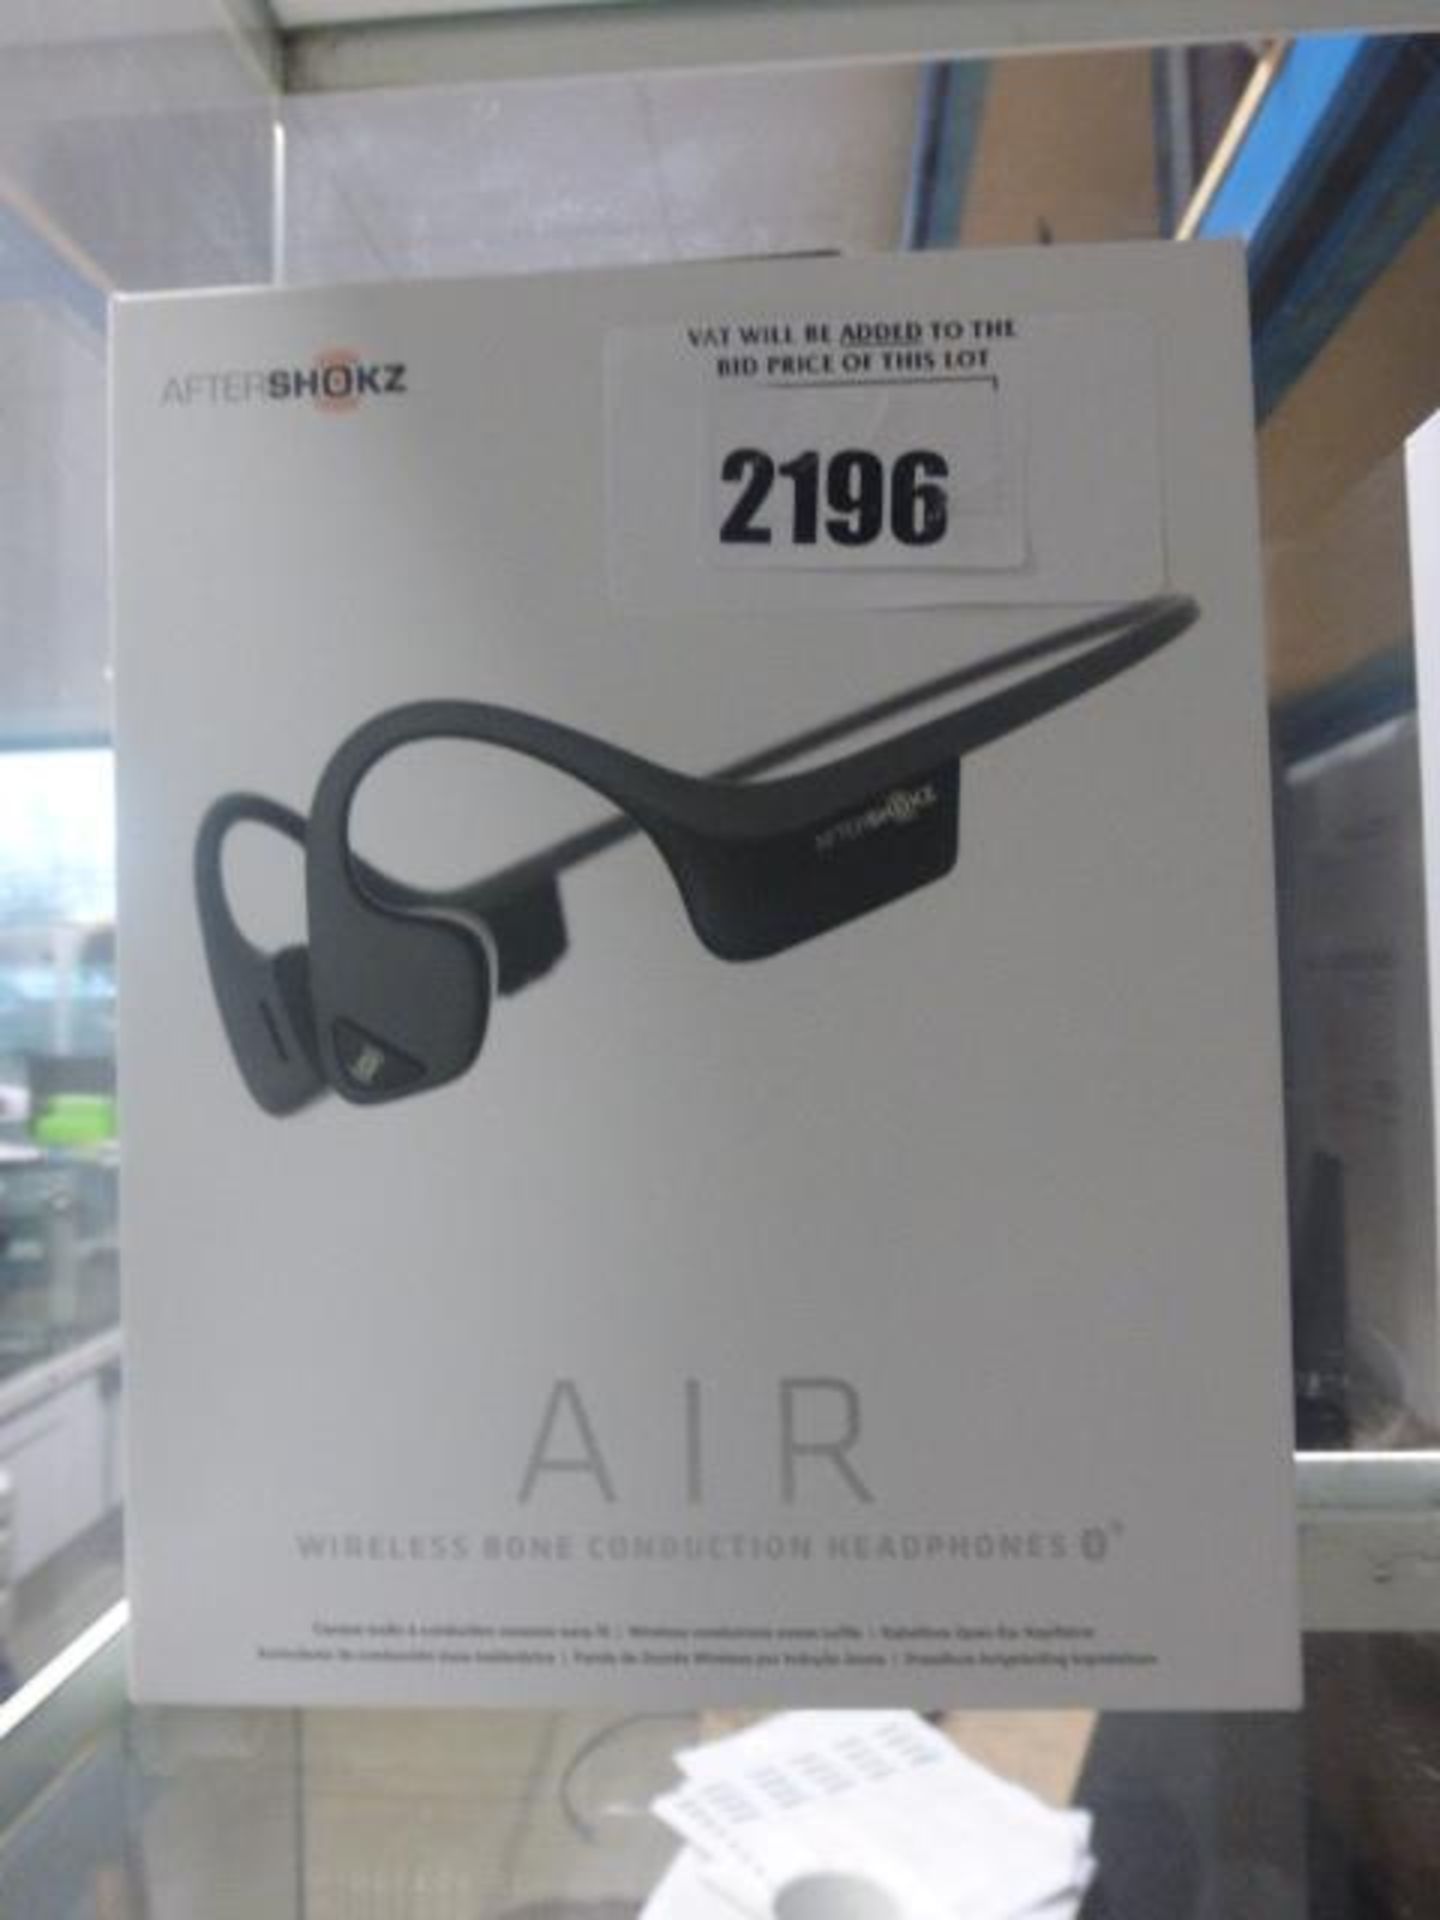 After shocks Air wireless phone conduction headphones in box